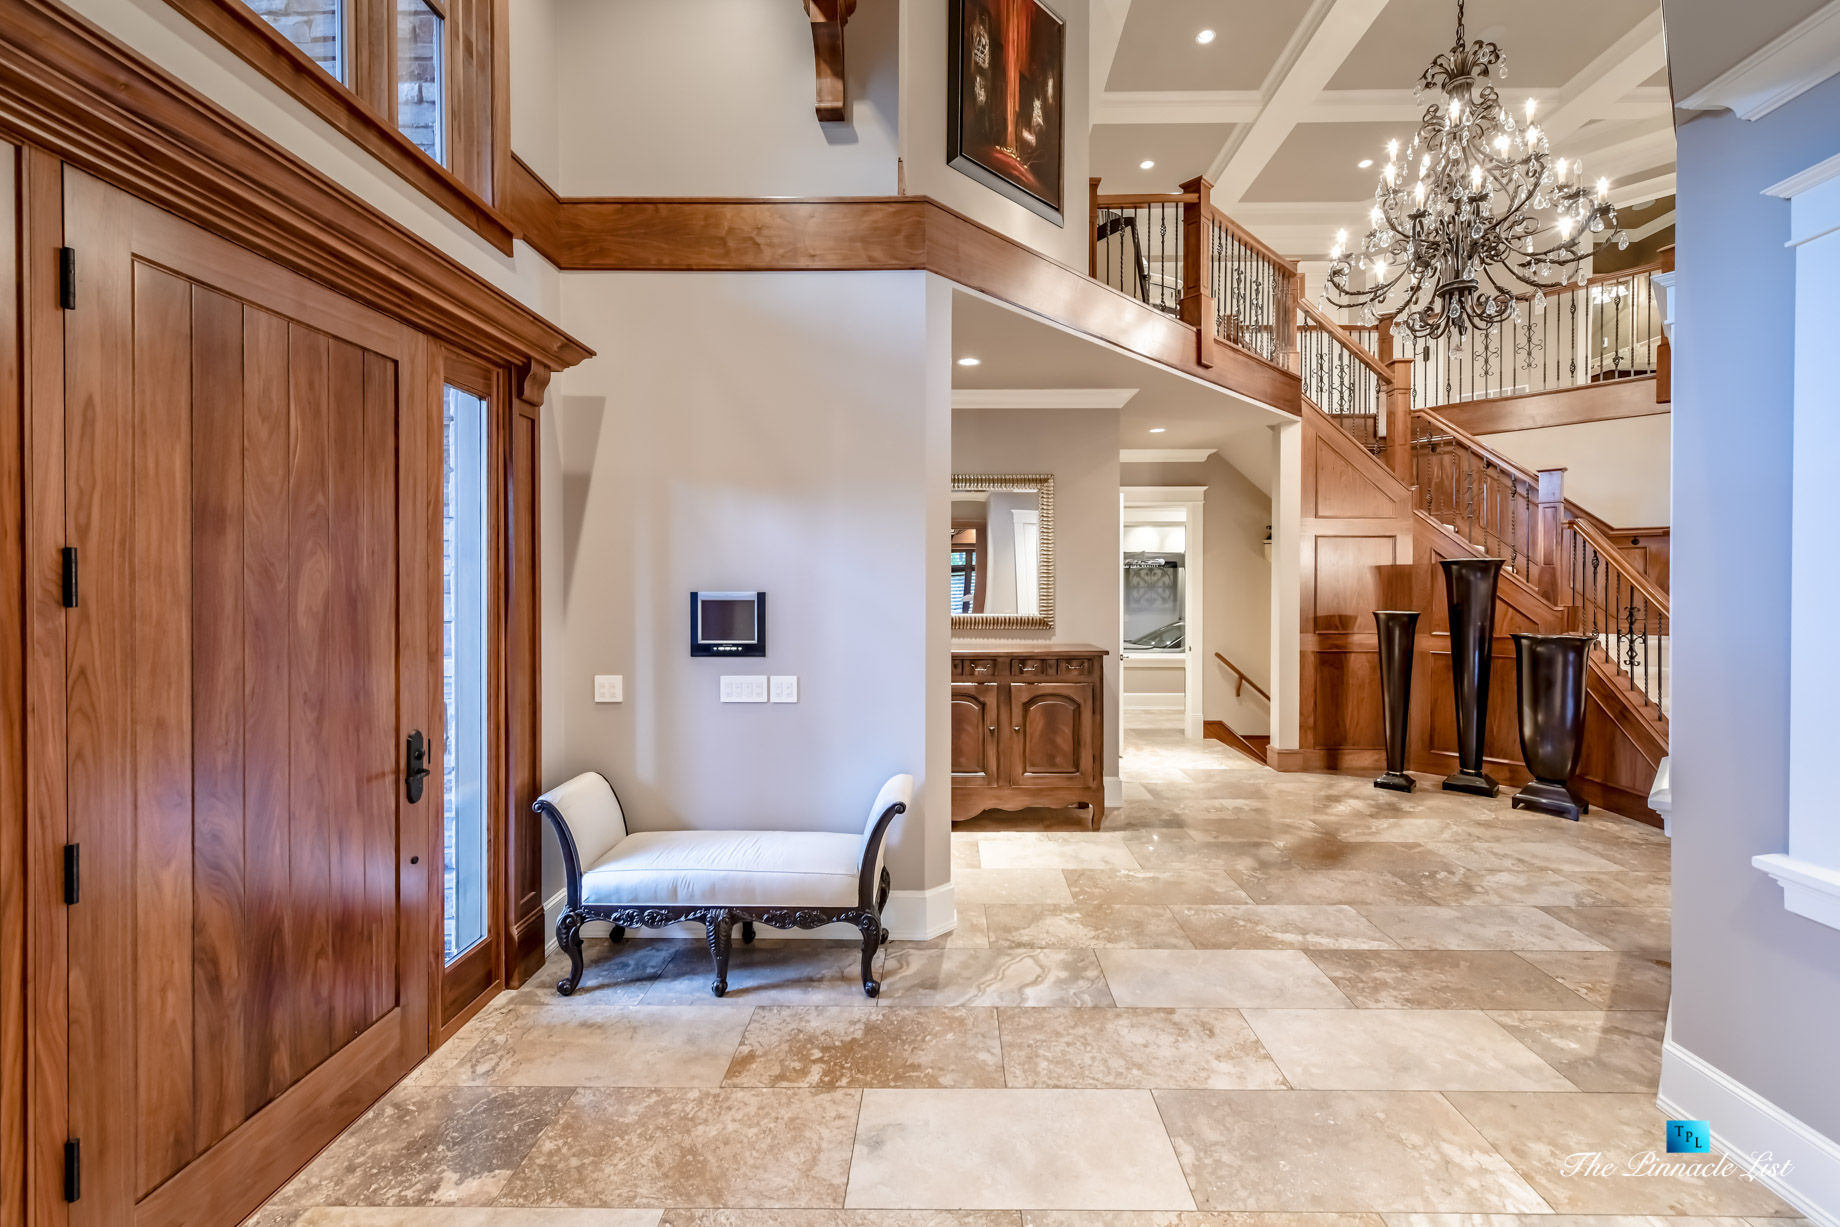 3053 Anmore Creek Way, Anmore, BC, Canada - Front Door Entrance Foyer - Luxury Real Estate - Greater Vancouver Home